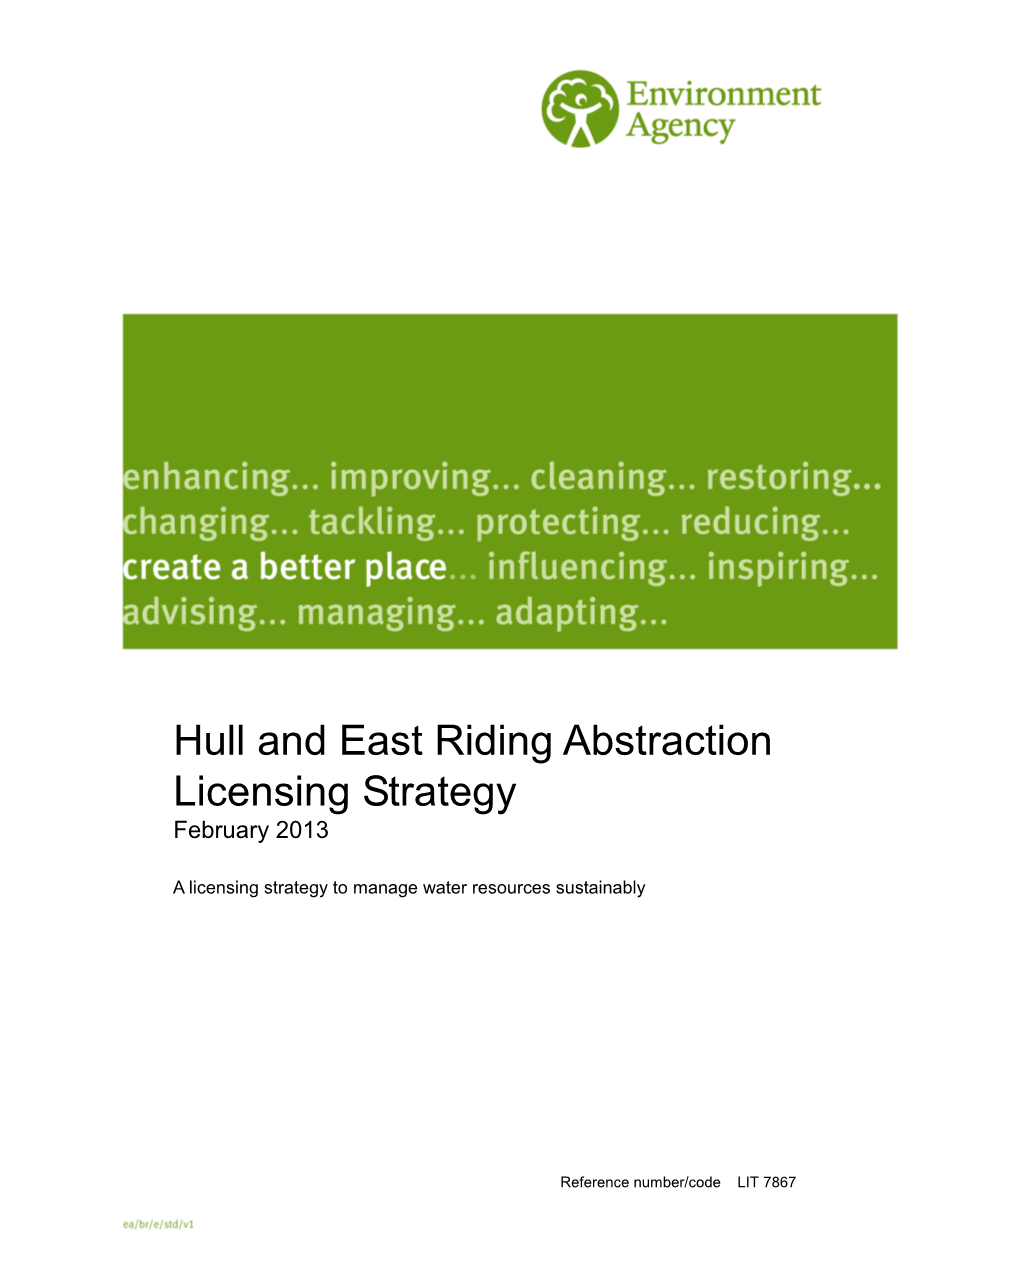 Hull and East Riding Abstraction Licensing Strategy Feb 2013 1 Map 1